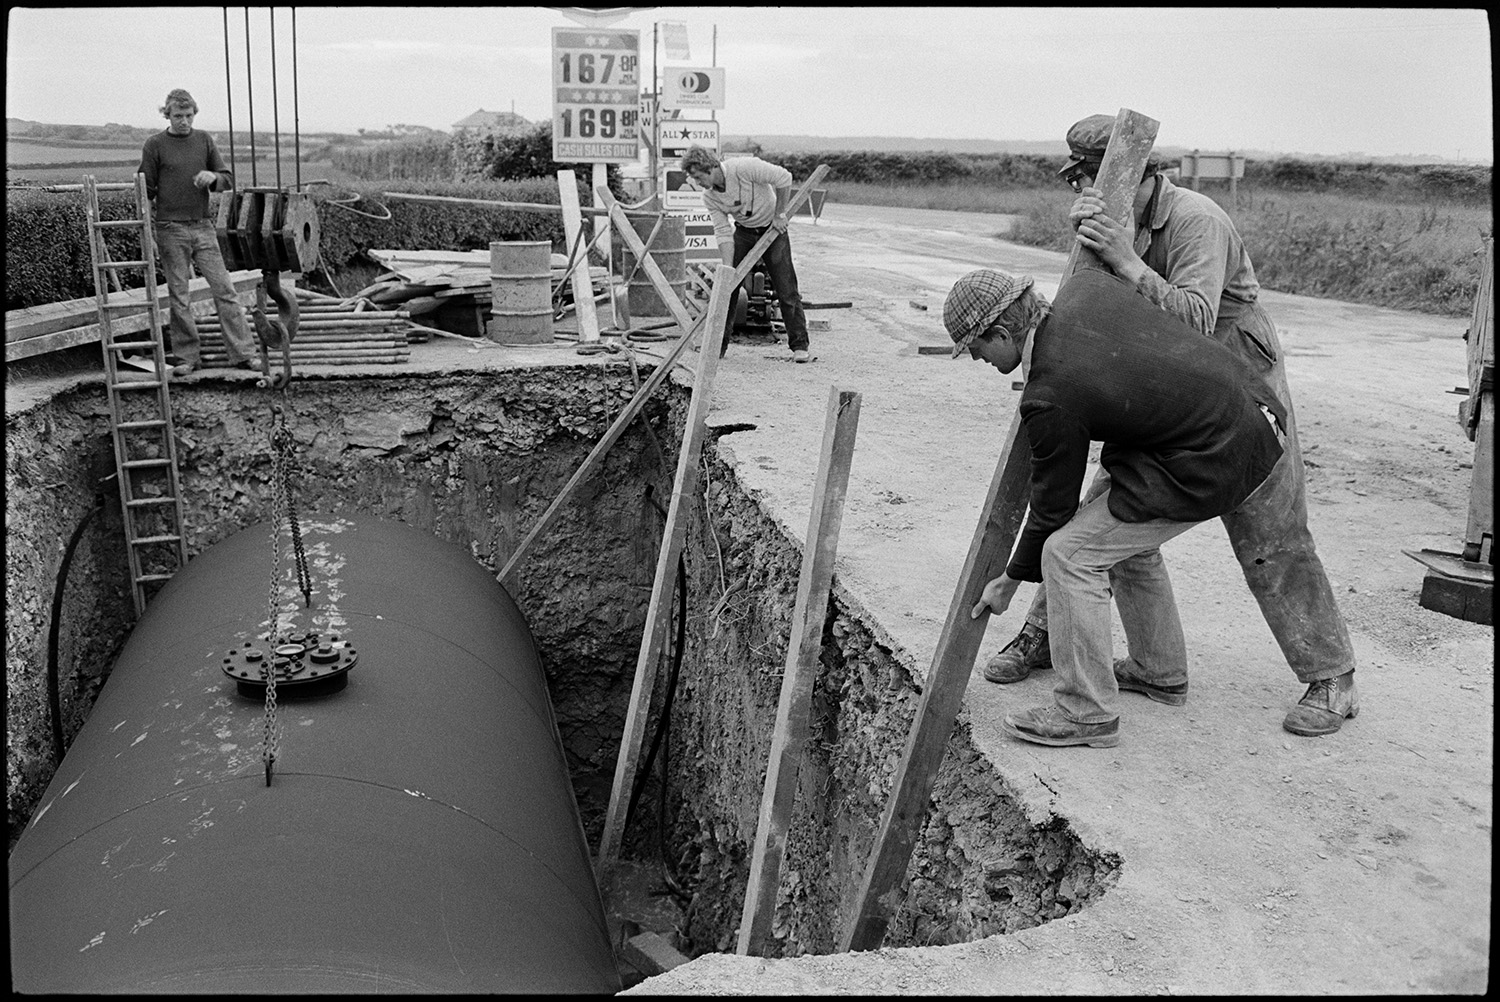 Men with crane installing huge underground petrol tank at garage.
[Four men installing a large petrol tank into an excavated hole at Beacon Garage, Dolton Beacon. They are using long wooden poles as levers.]